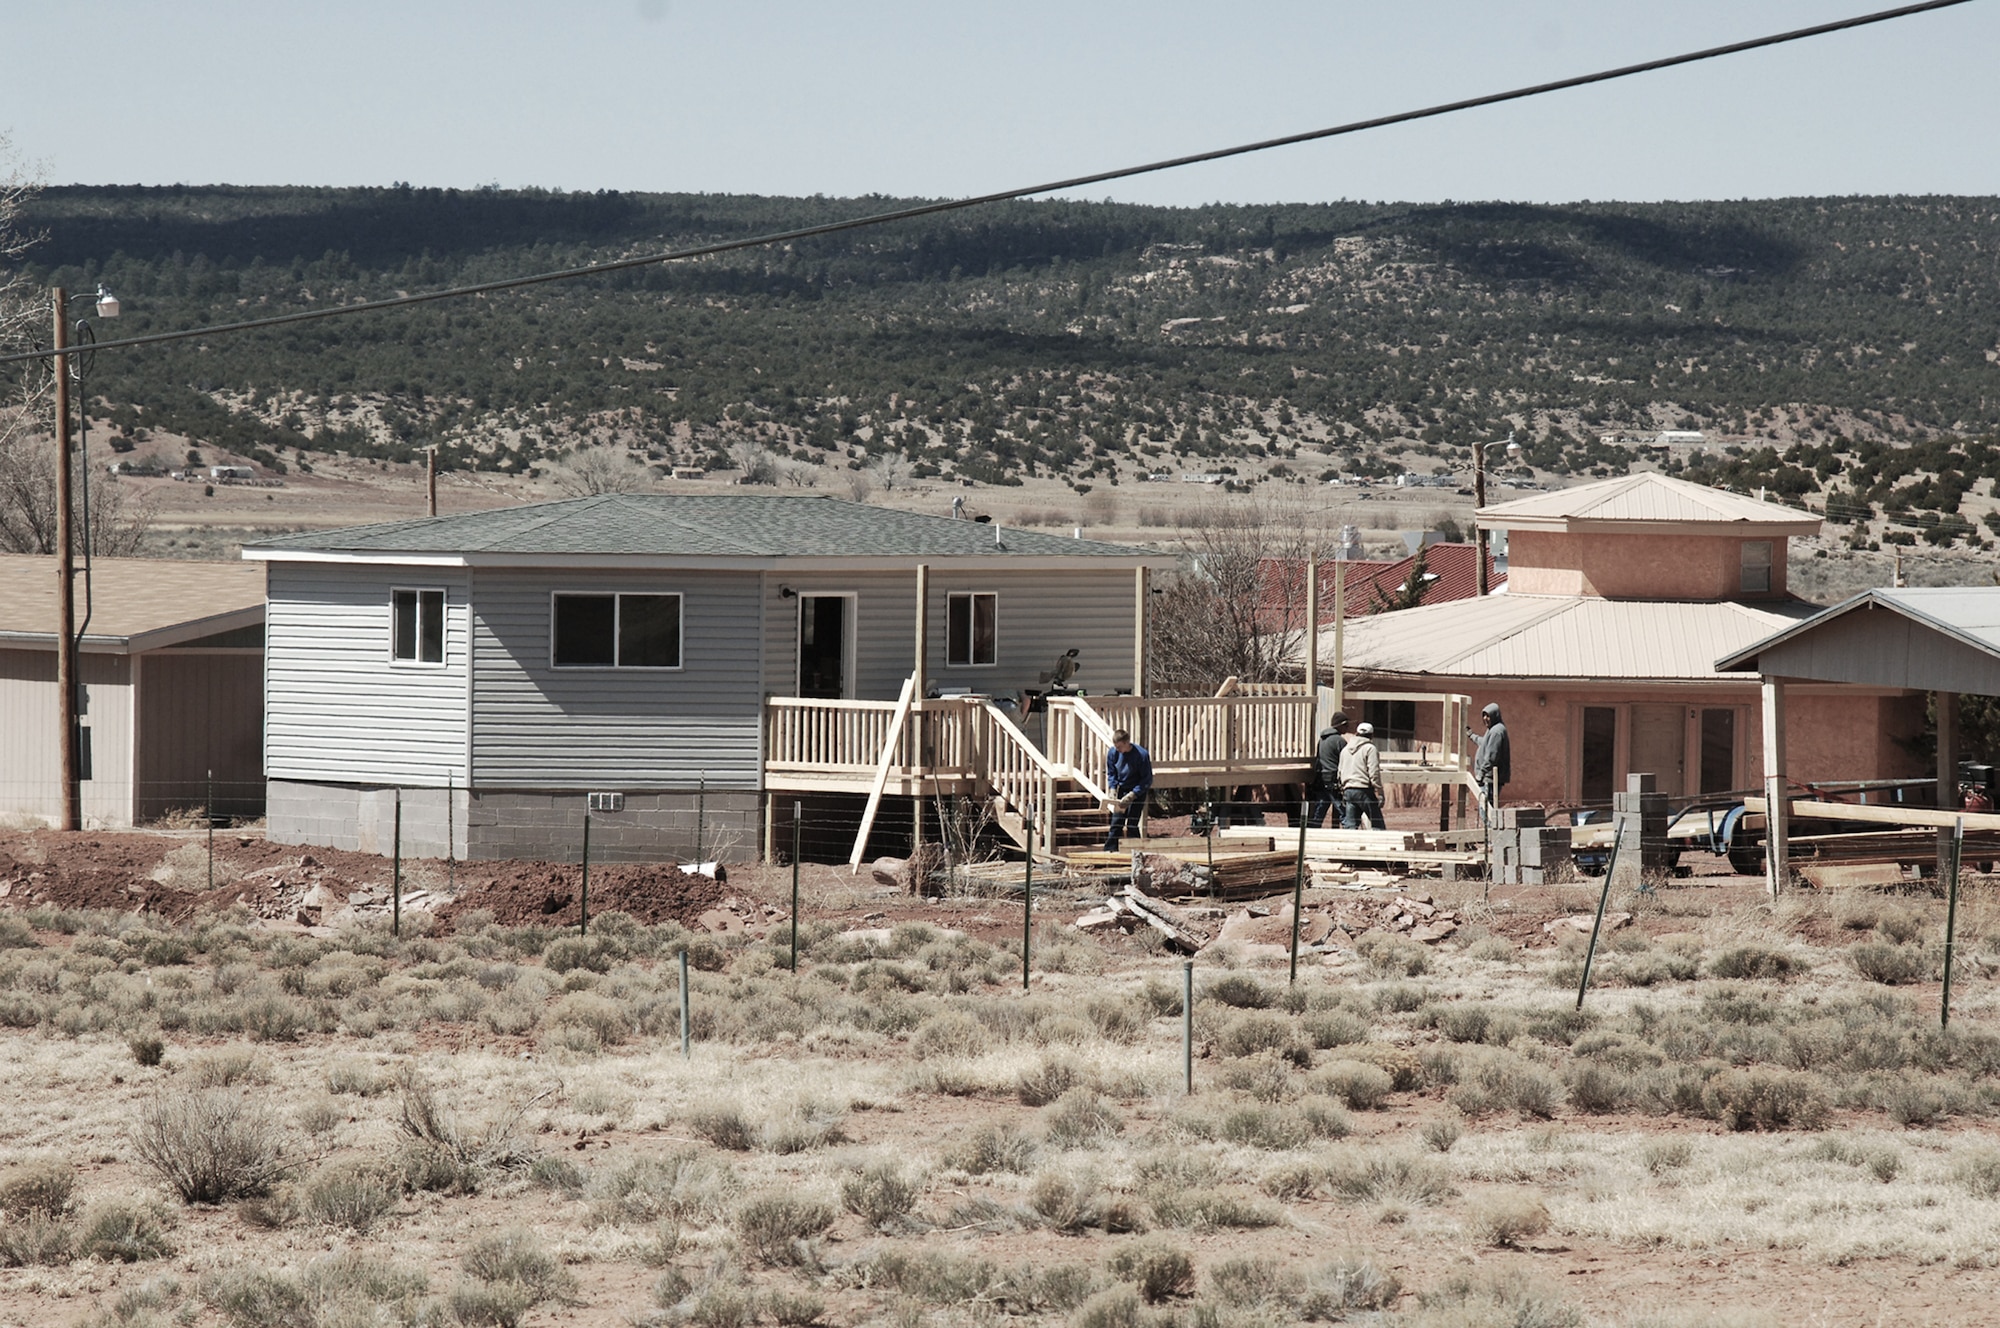 U.S. Air Force Academy cadets and faculty work with site managers to help build low-cost housing on the Navajo Reservation in Arizona. (U.S. Air Force photo/John Van Winkle) 
